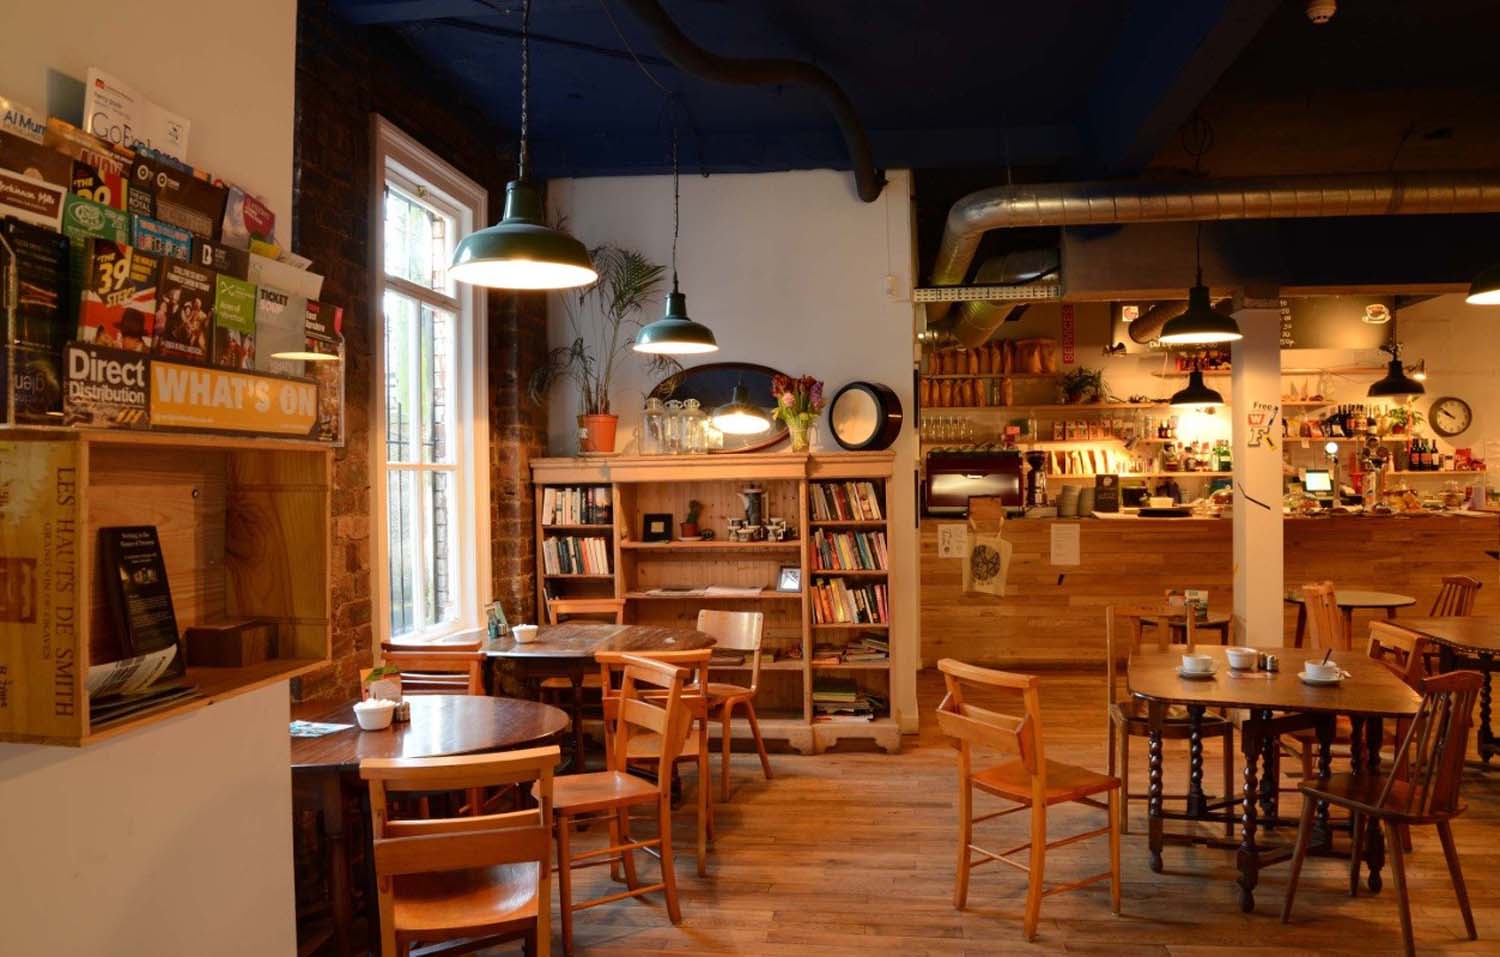 The Glad Cafe seating area with wooden tables and chairs, a bookshelf filled with books and dark green light pendants.